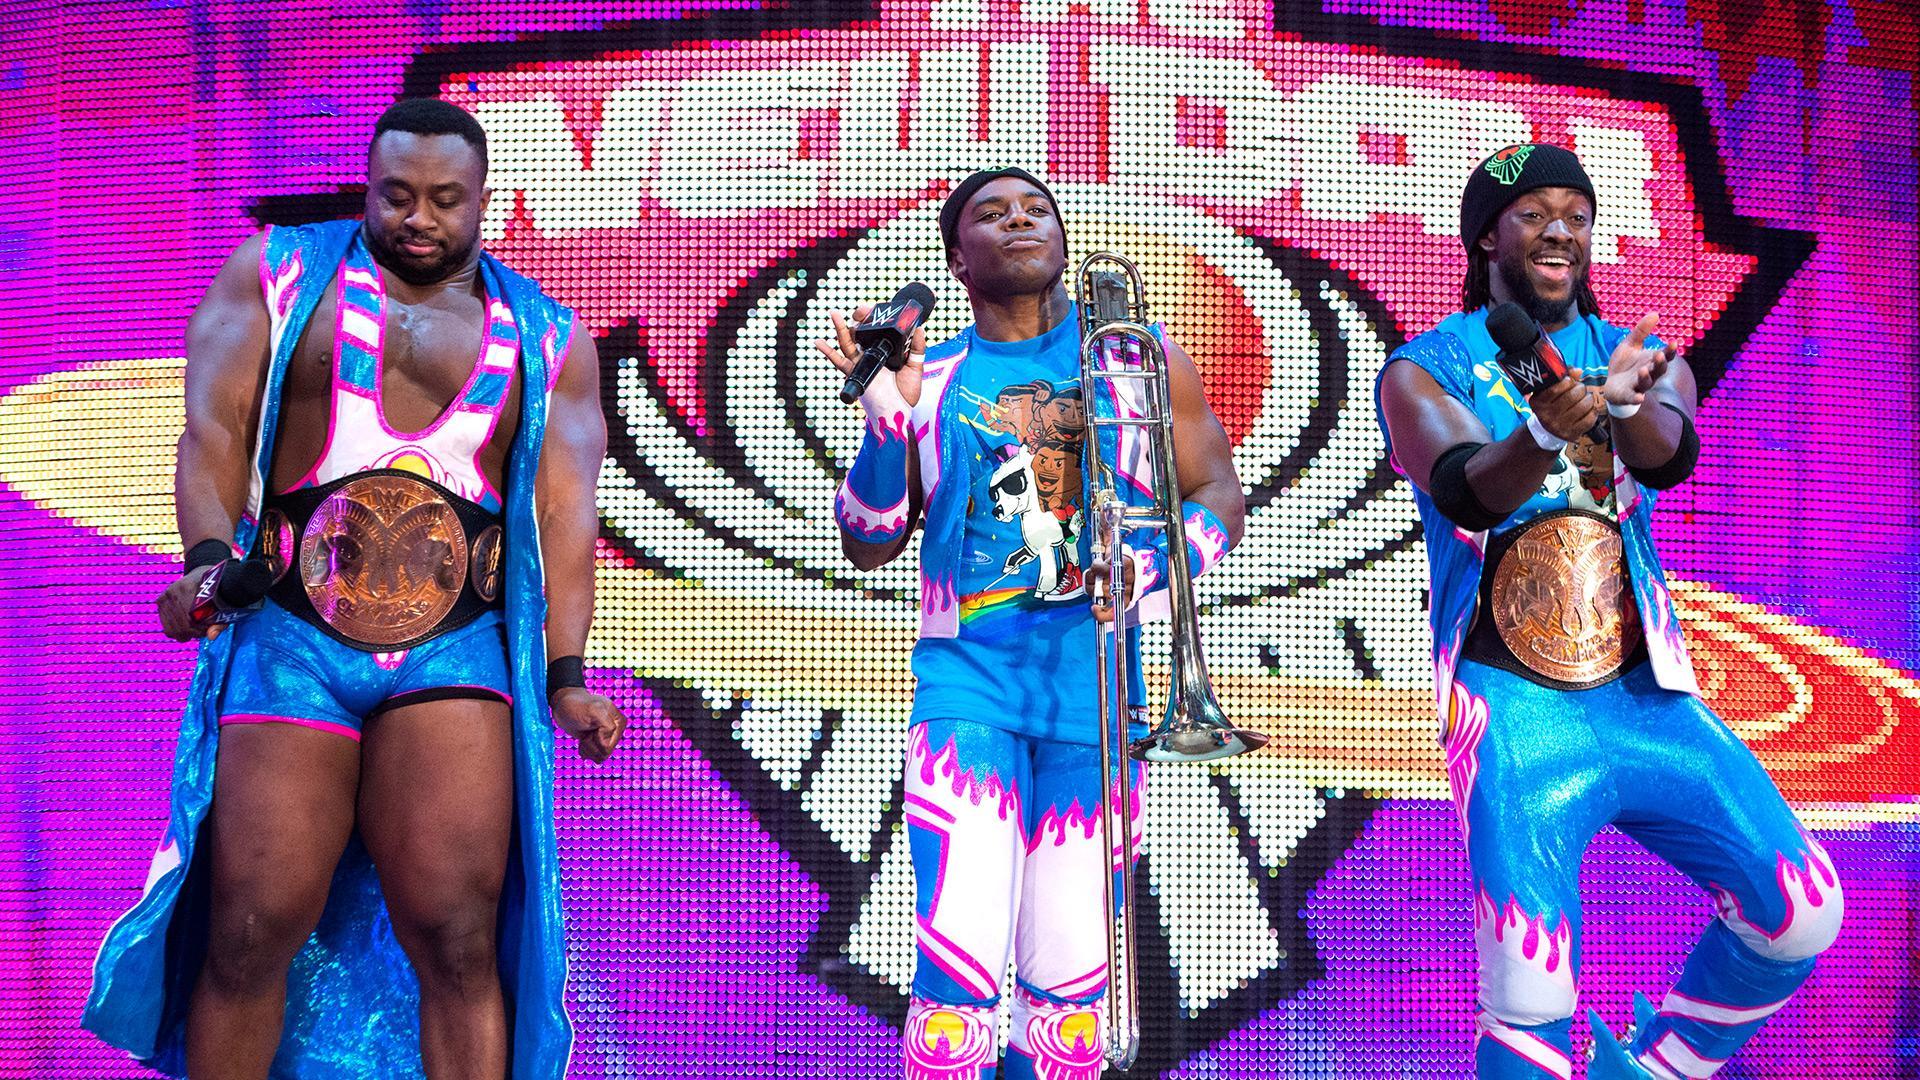 The New Day Are Officially the Longest Reigning WWE Tag Team